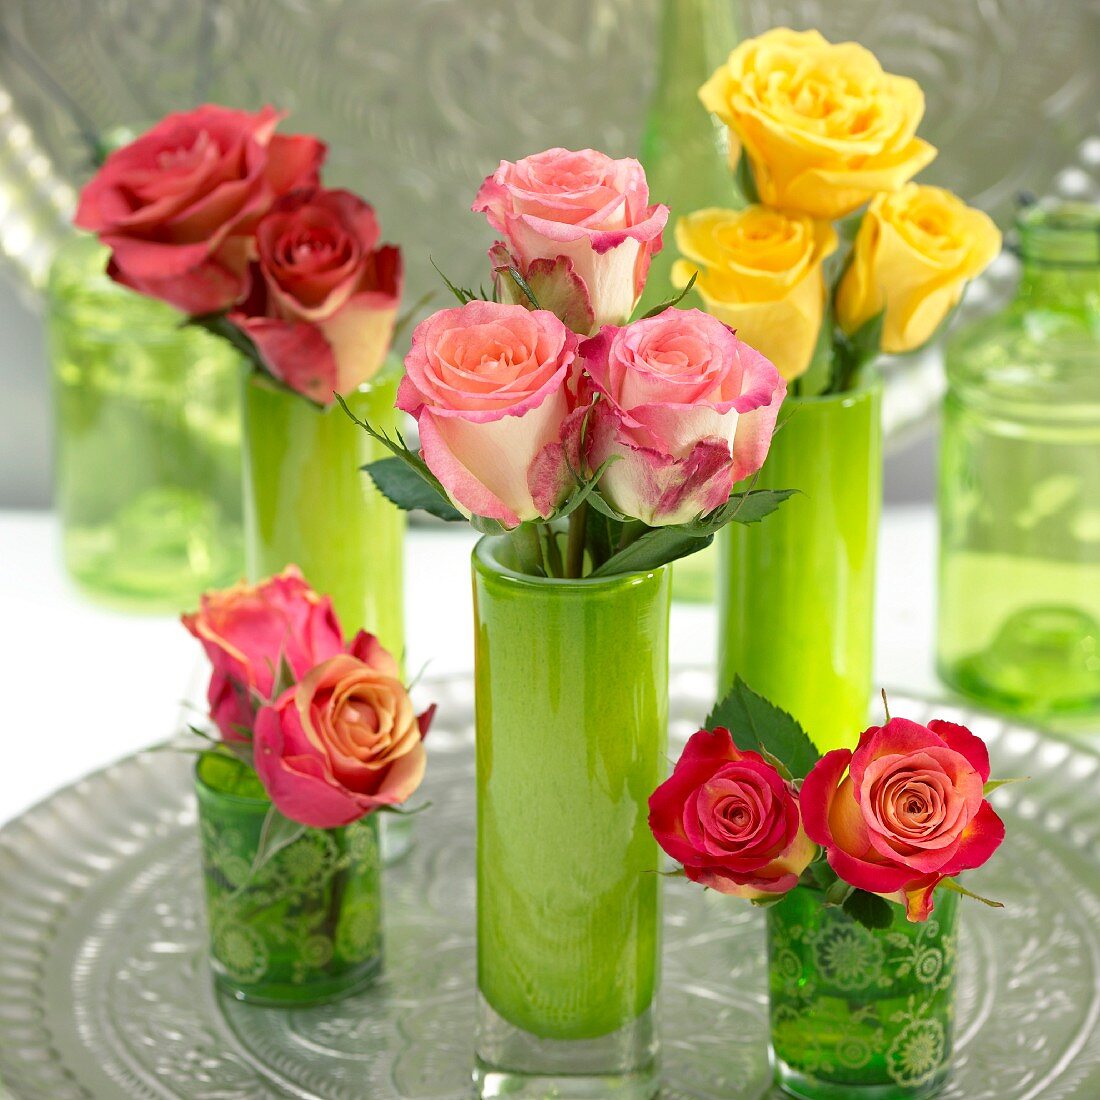 Assorted roses in vases as table decorations